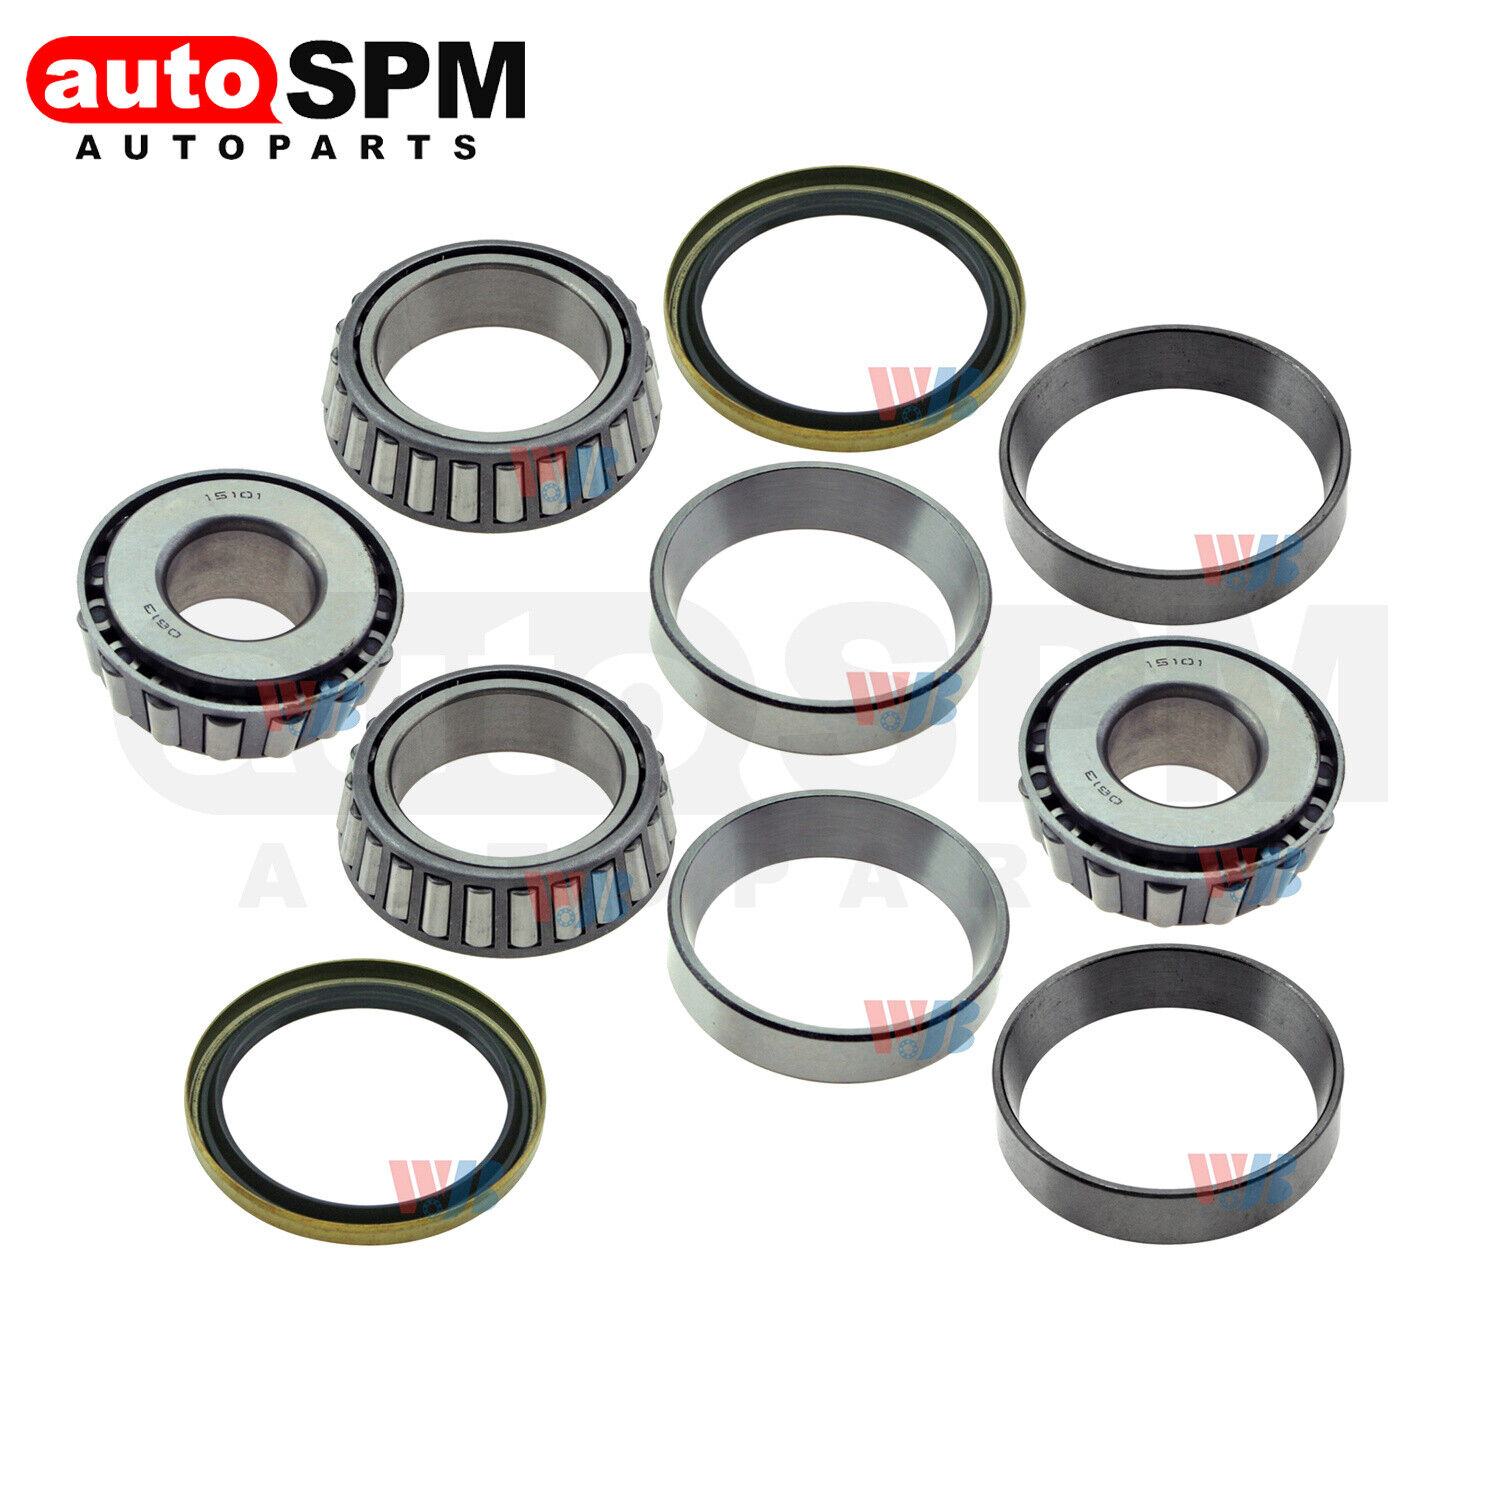 10Pcs Front Wheel Bearing and Seal Kit For Ford E-250 E-350 Econoline Club Wagon